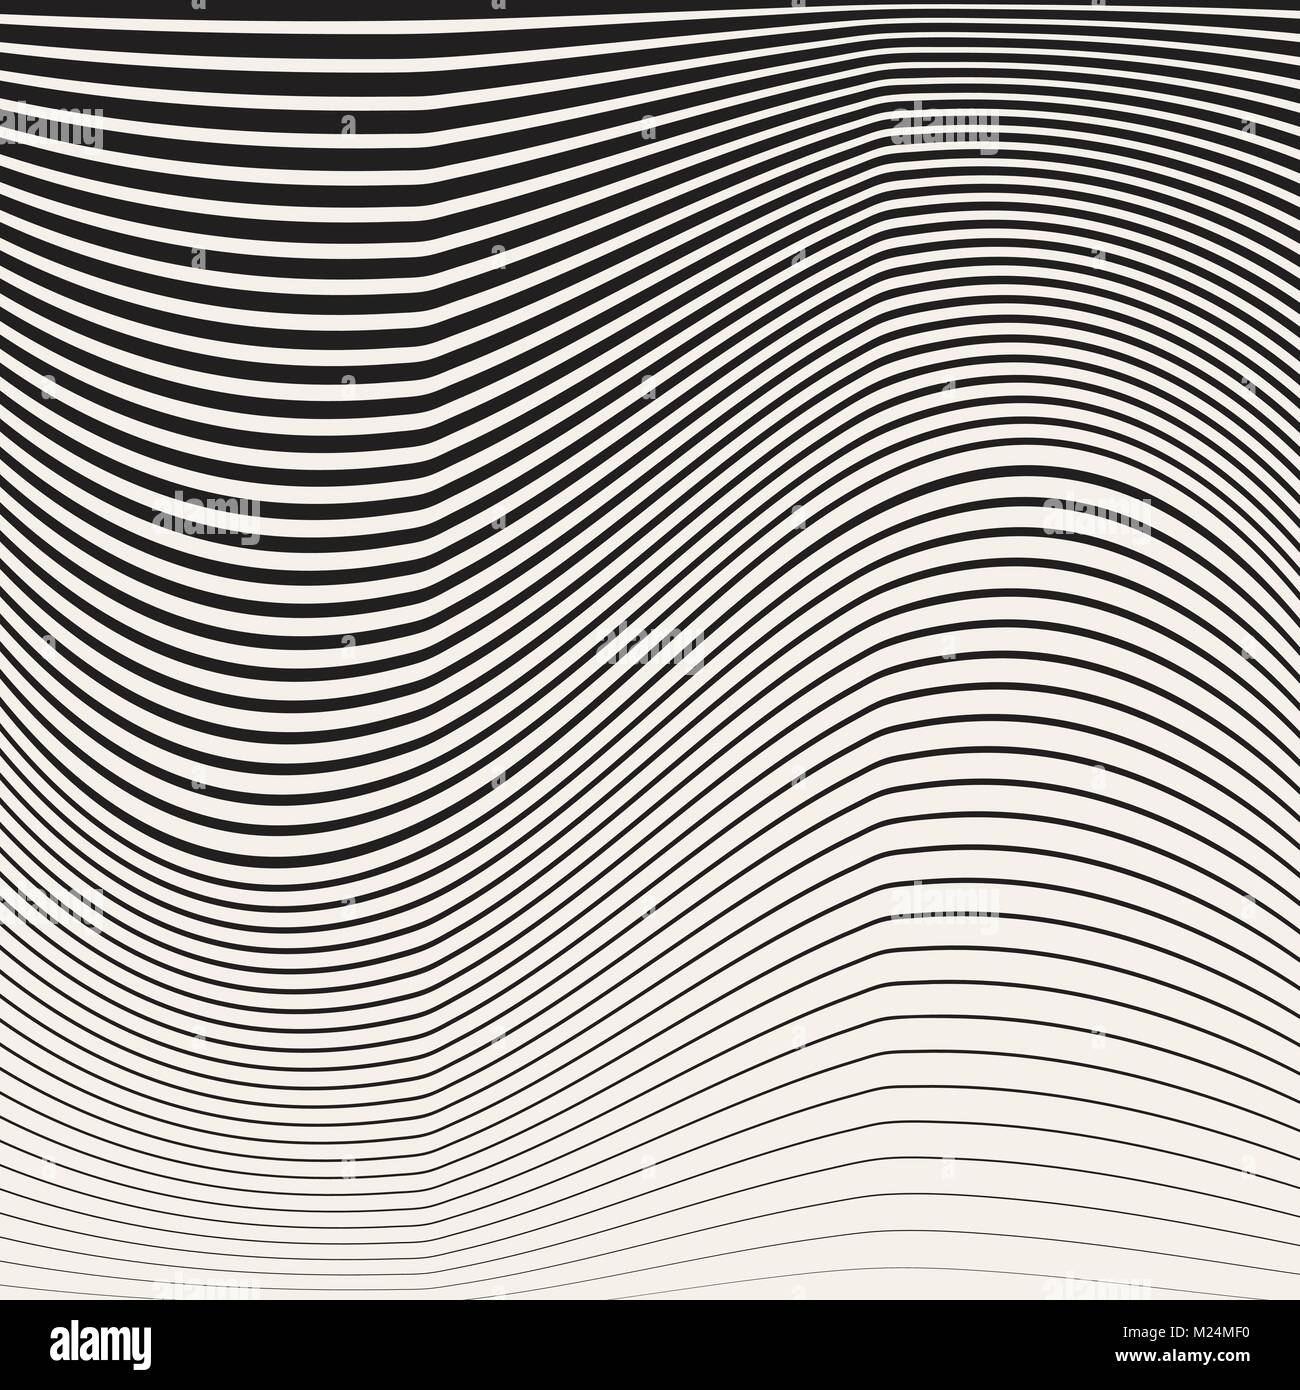 Abstract black and white halftone vertical waves stripes pattern. Vector illustration Stock Vector